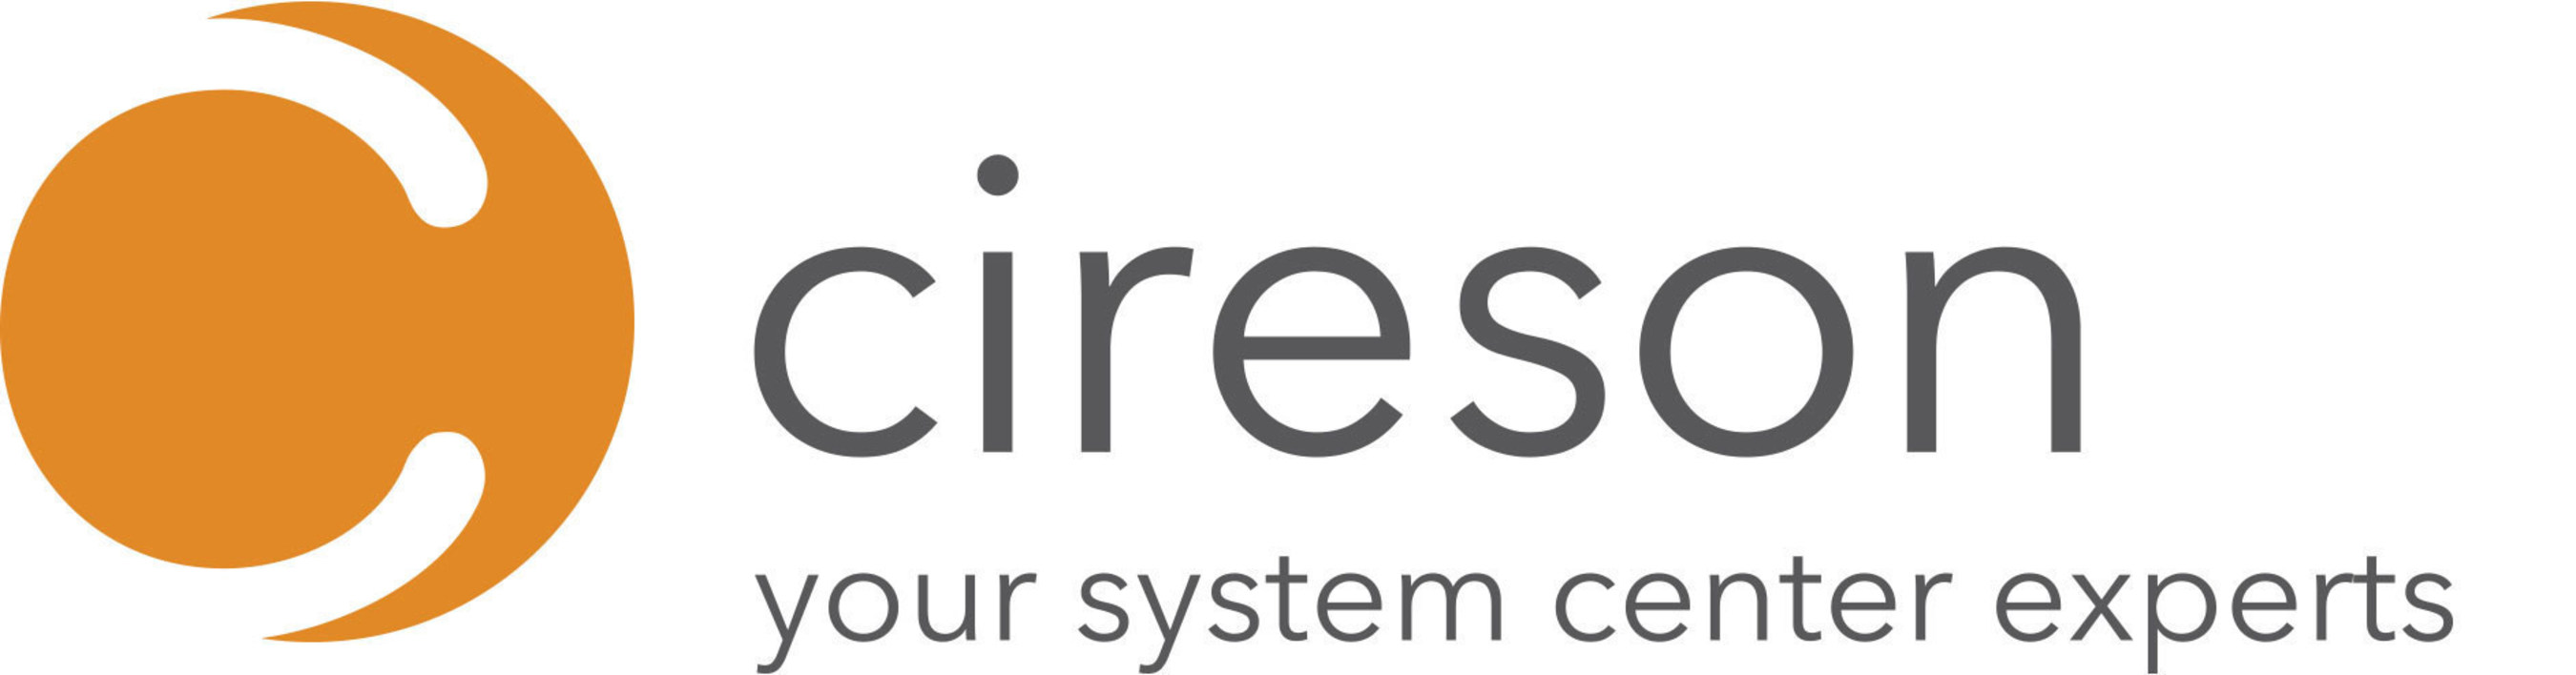 Cireson -Your System Center Experts